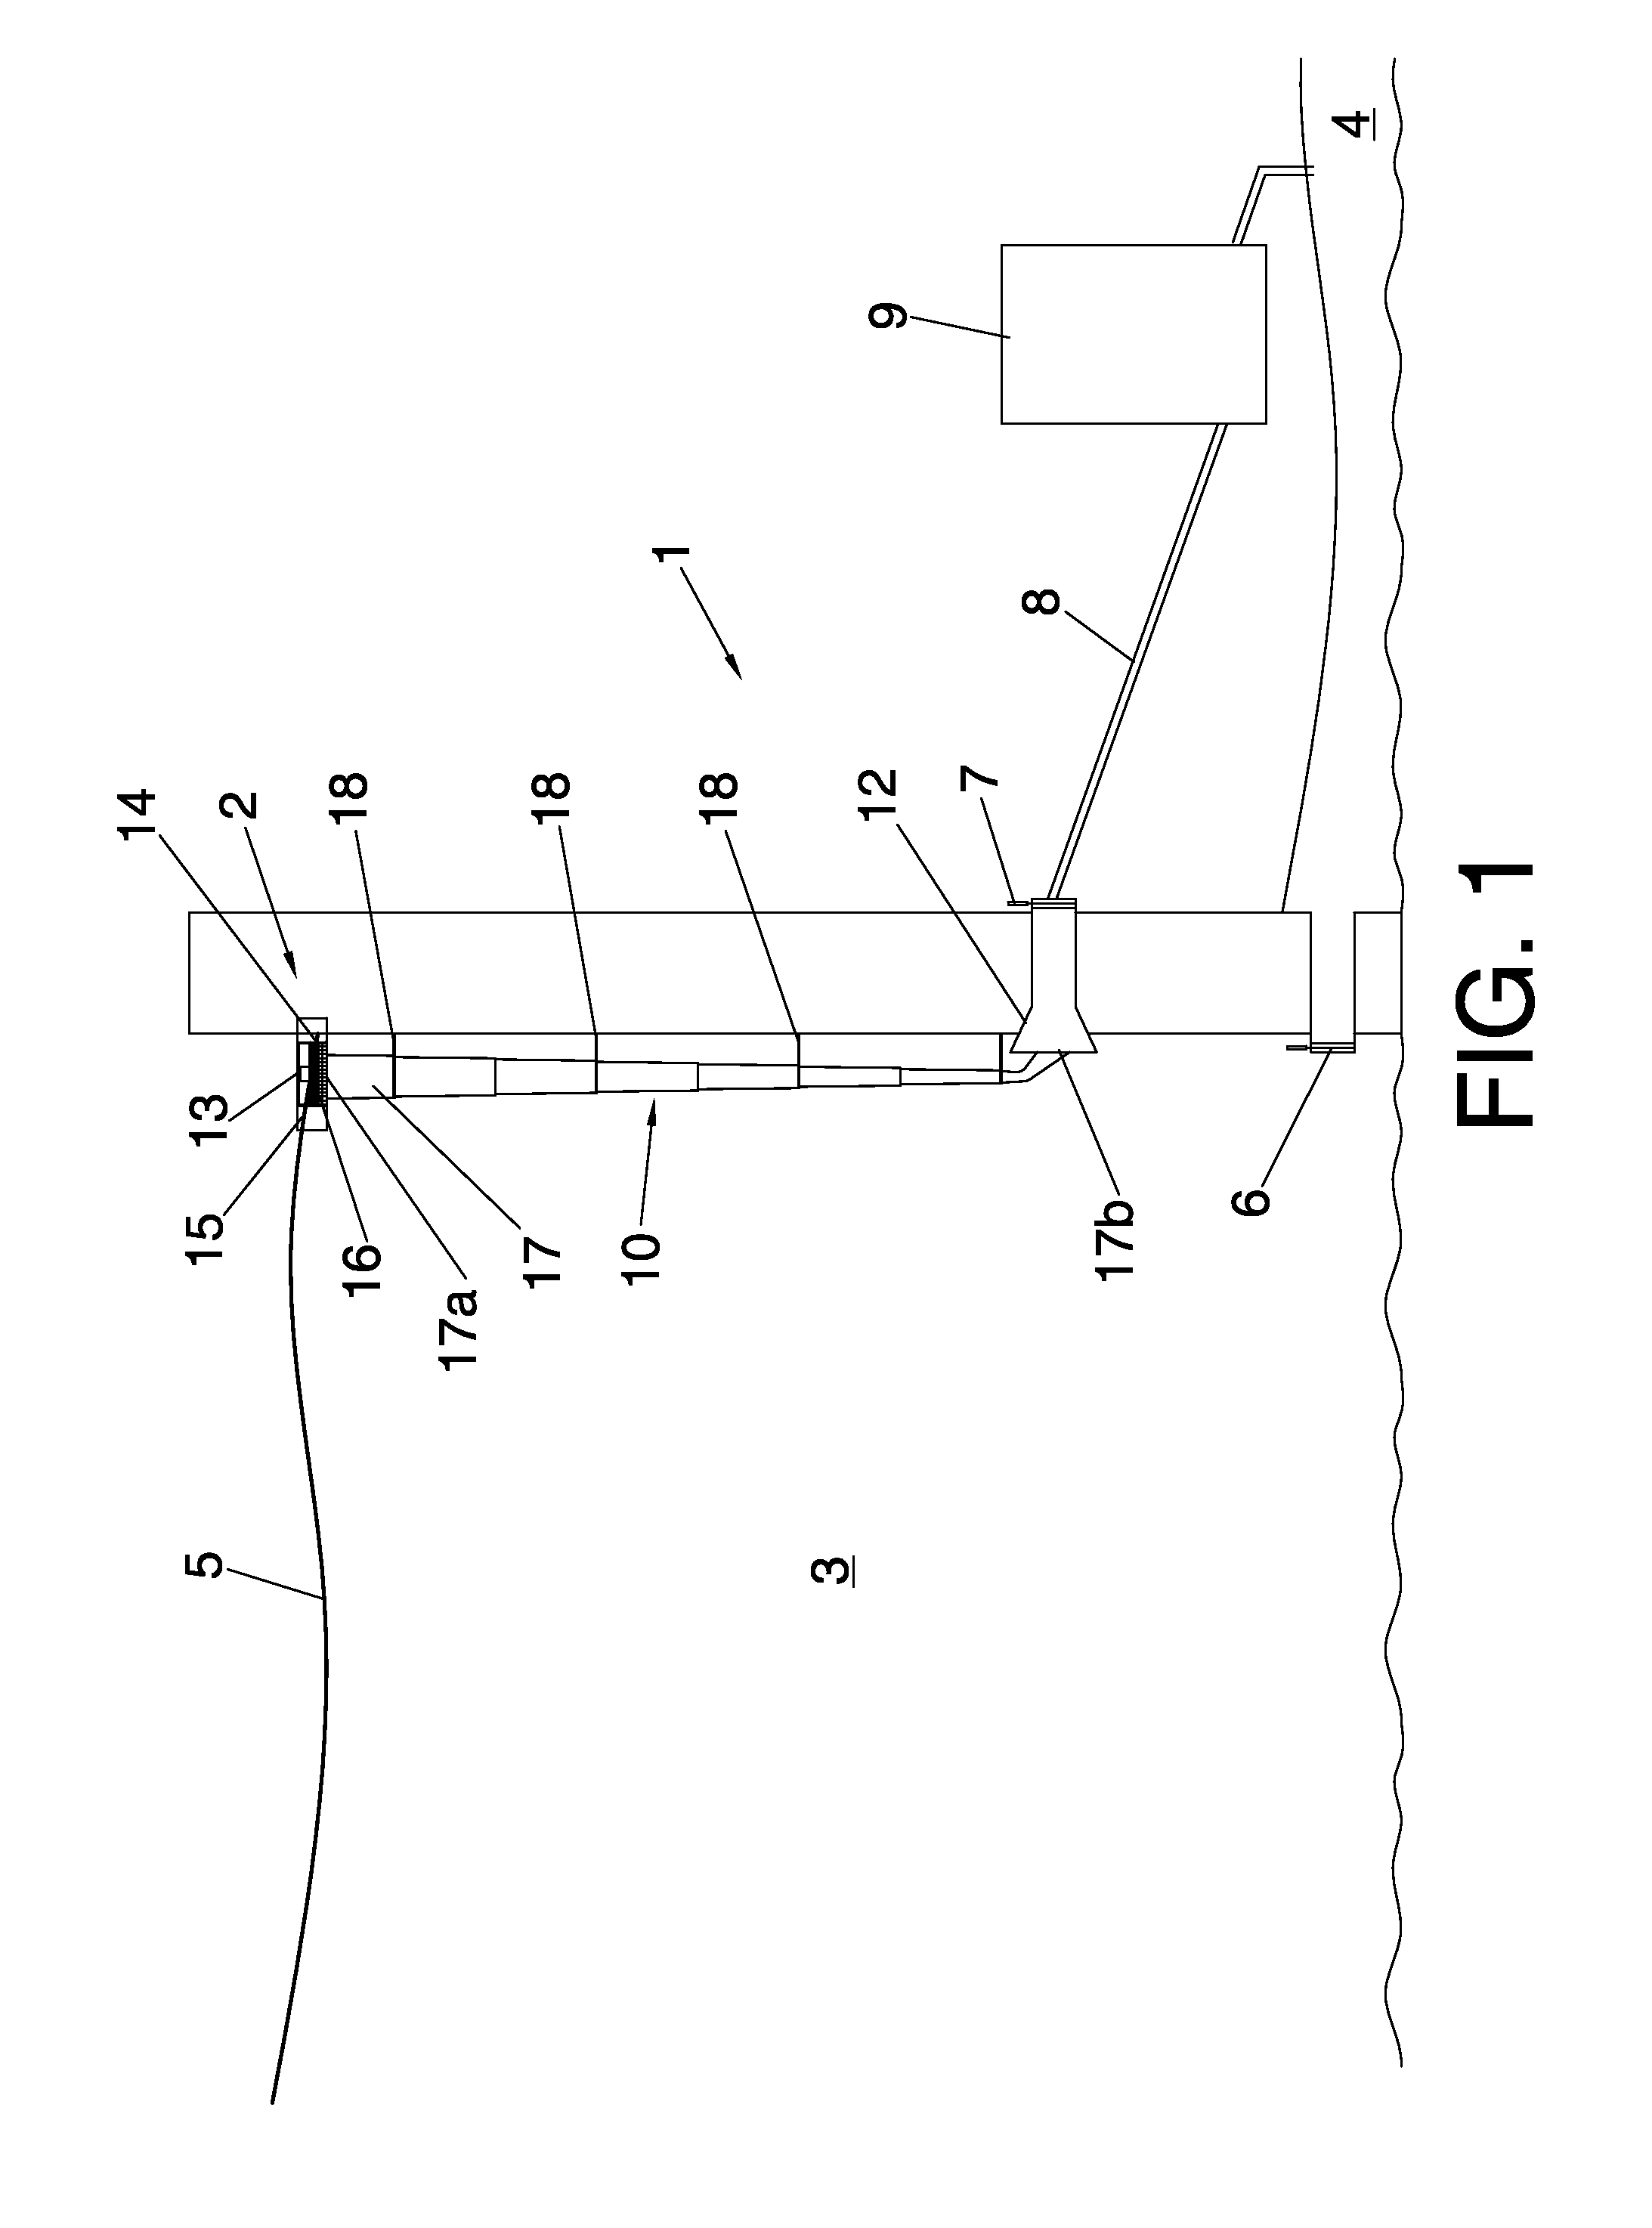 System and method for reducing the downstream environmental impact of water extracted from a hydraulic dam